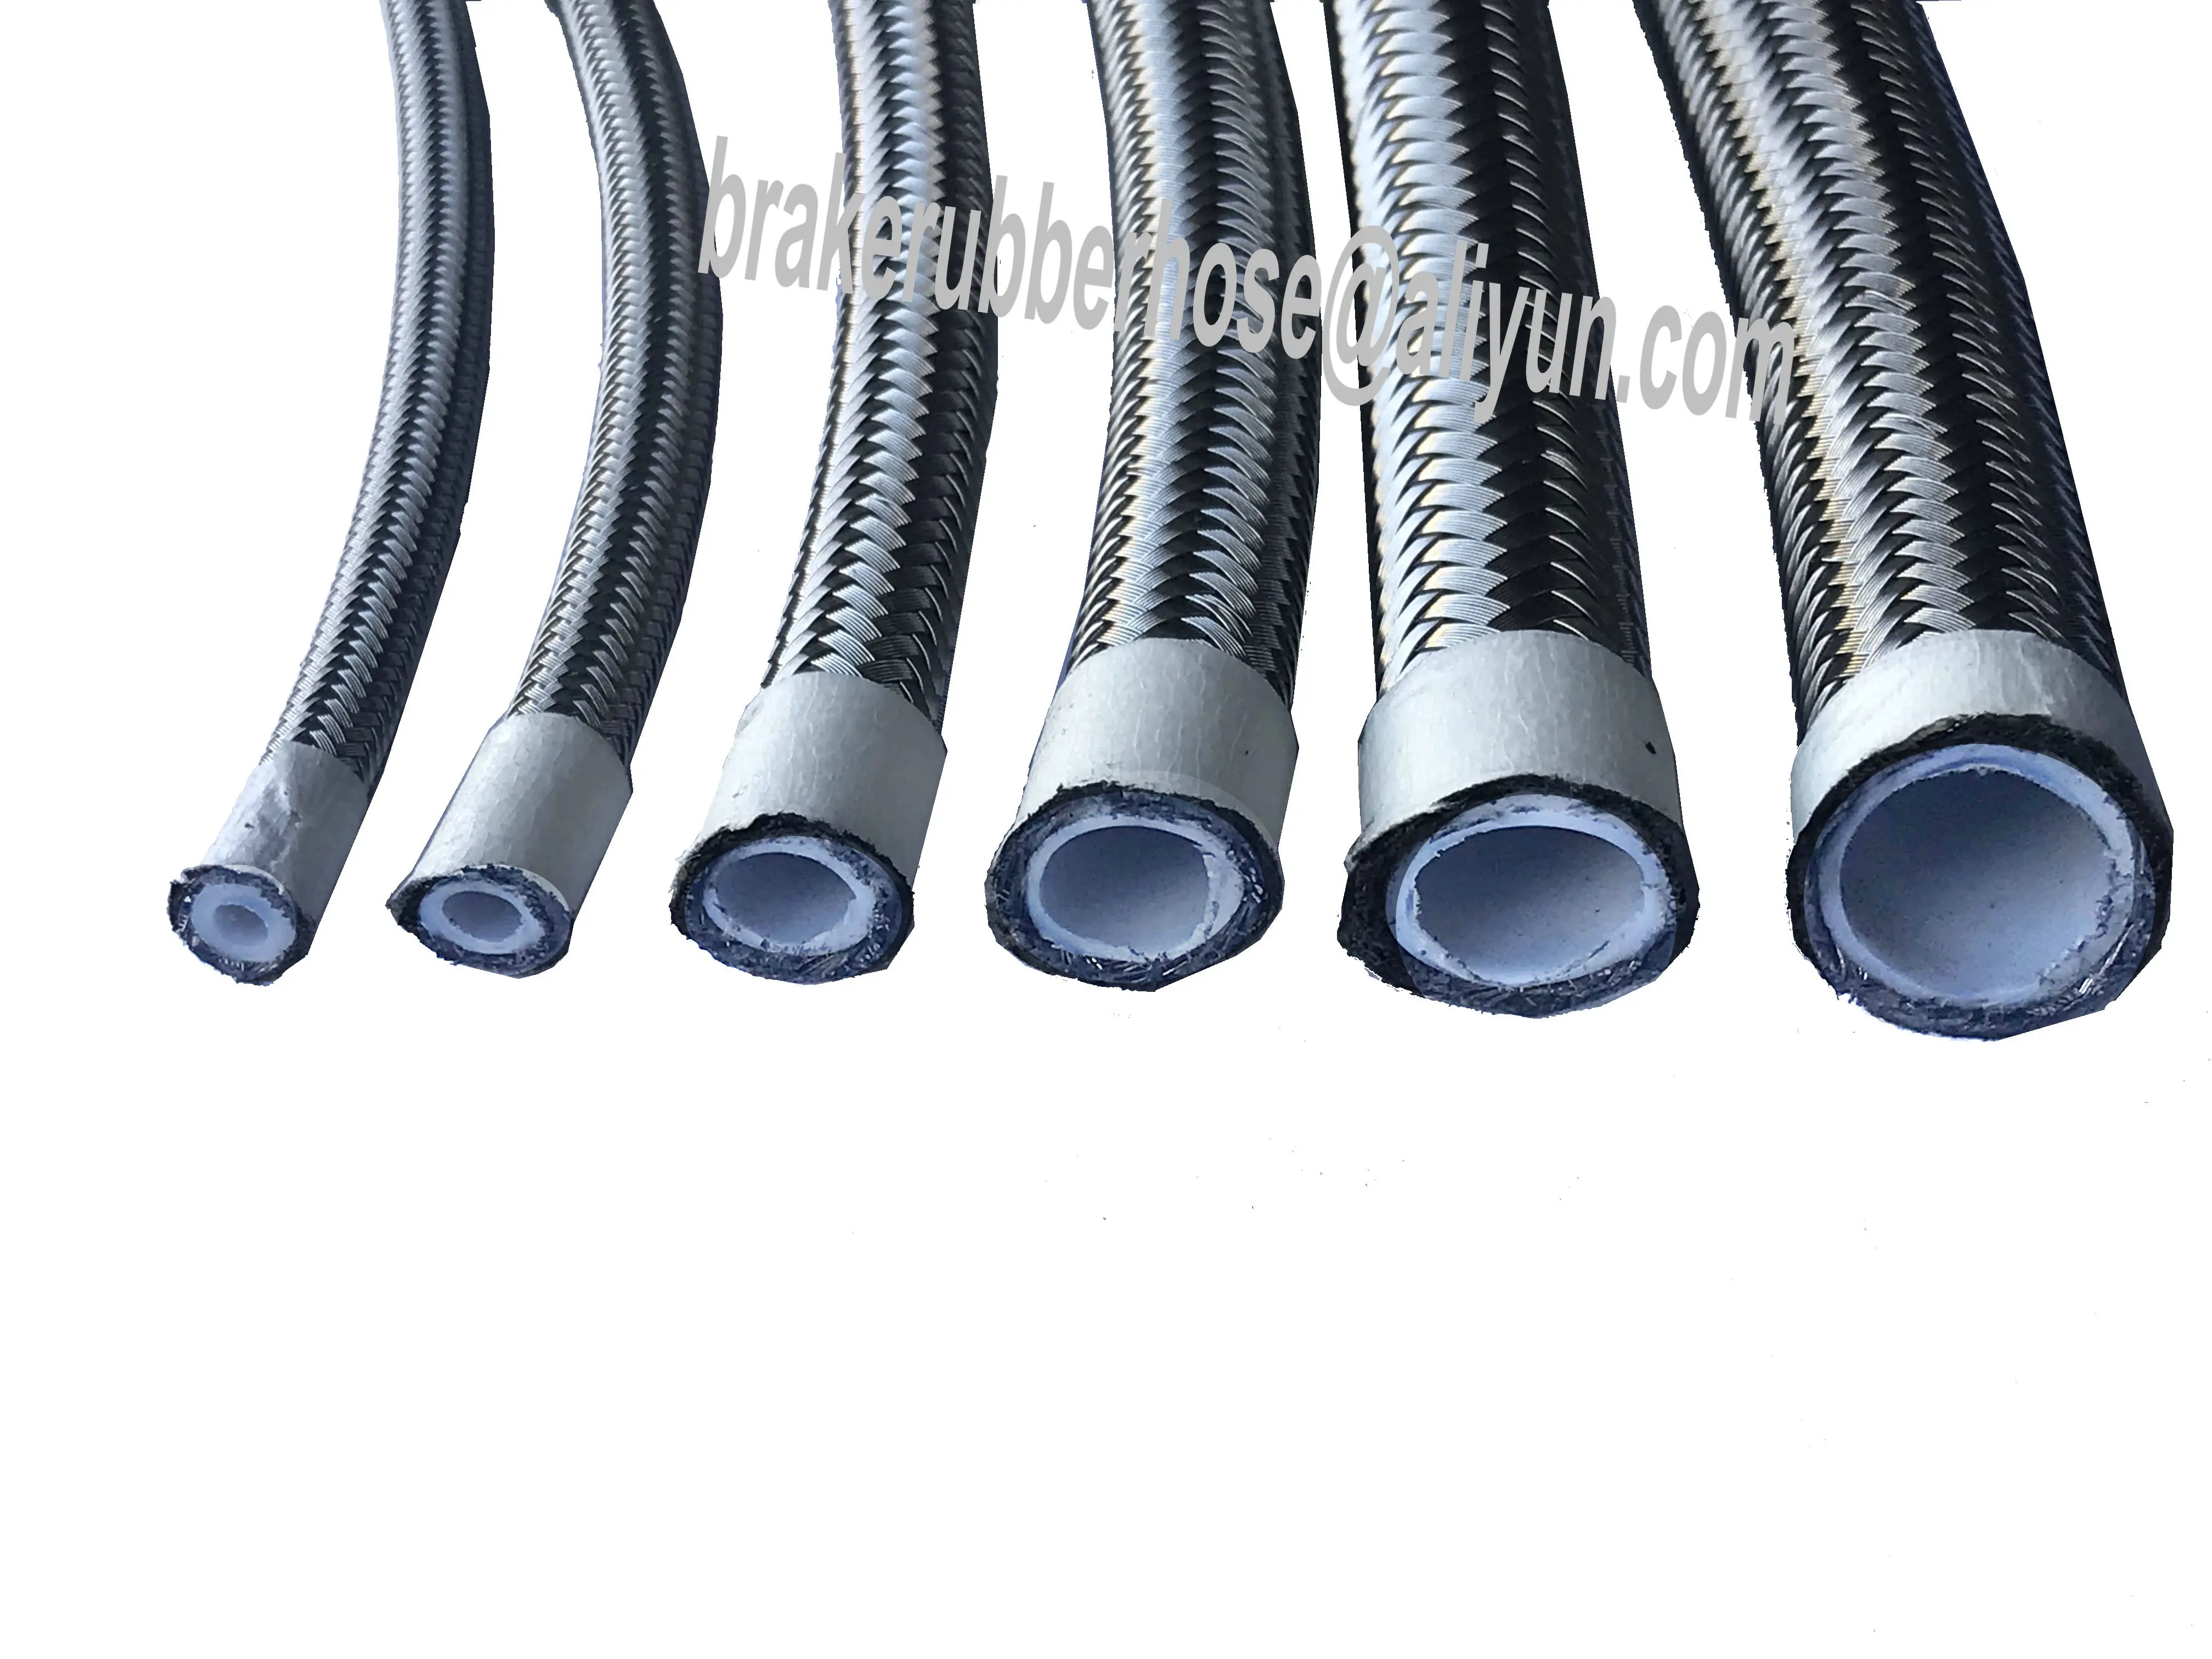 Stainless Steel Braided TEFLON PTFE Fuel Pipe Hose Car Van Petrol  ALL SIZES 